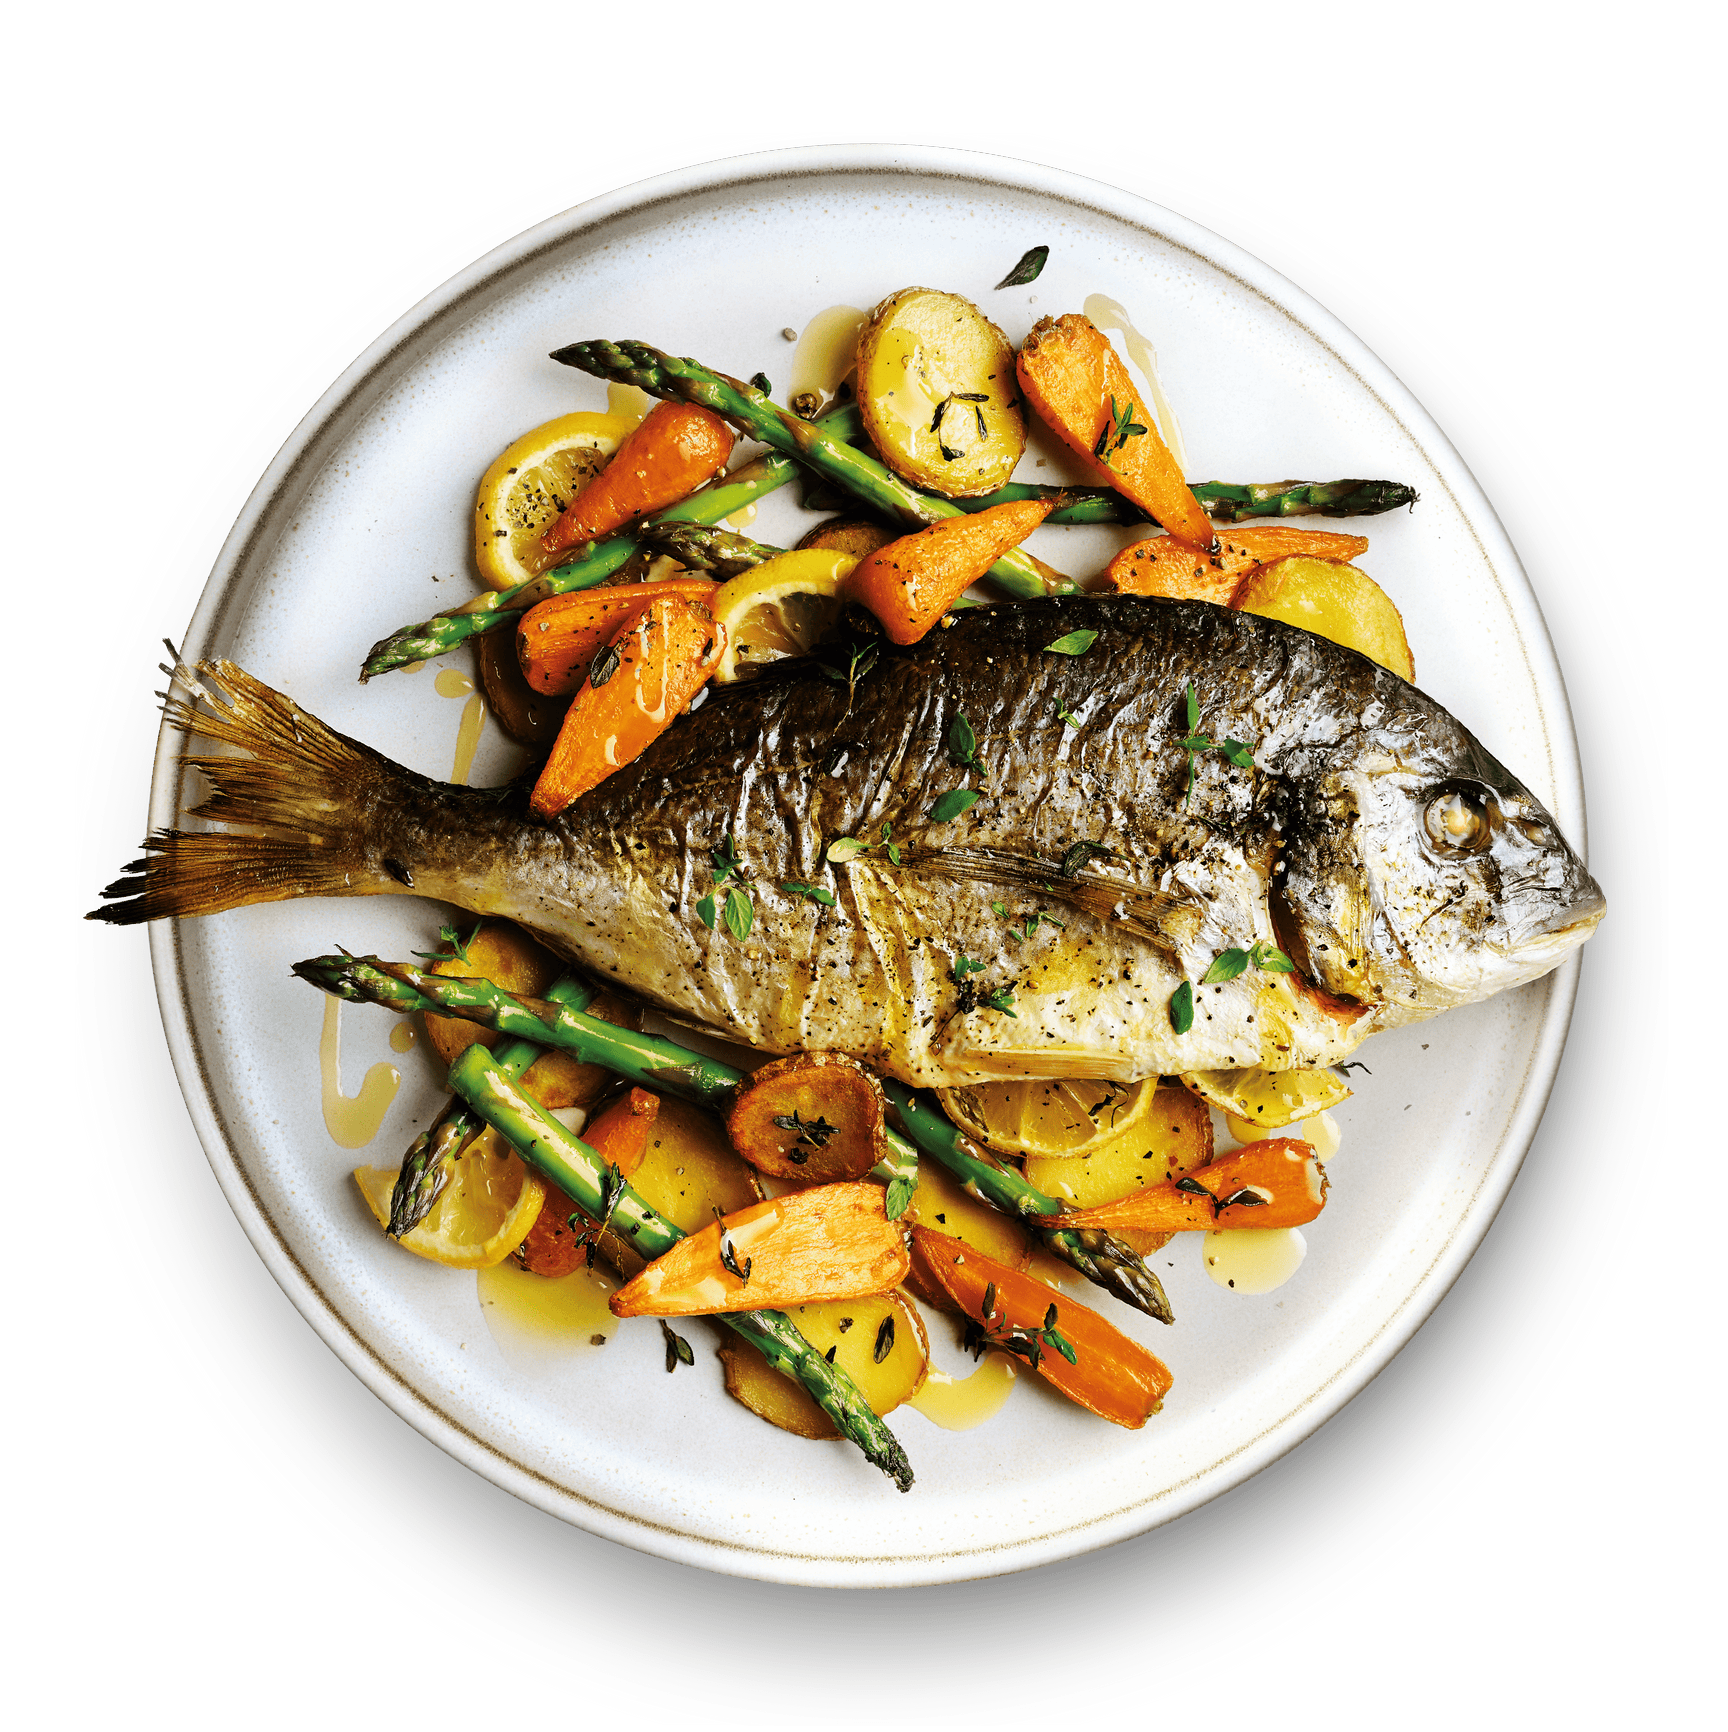 Fred's whole sea bream, baby potatoes and vegetable traybake